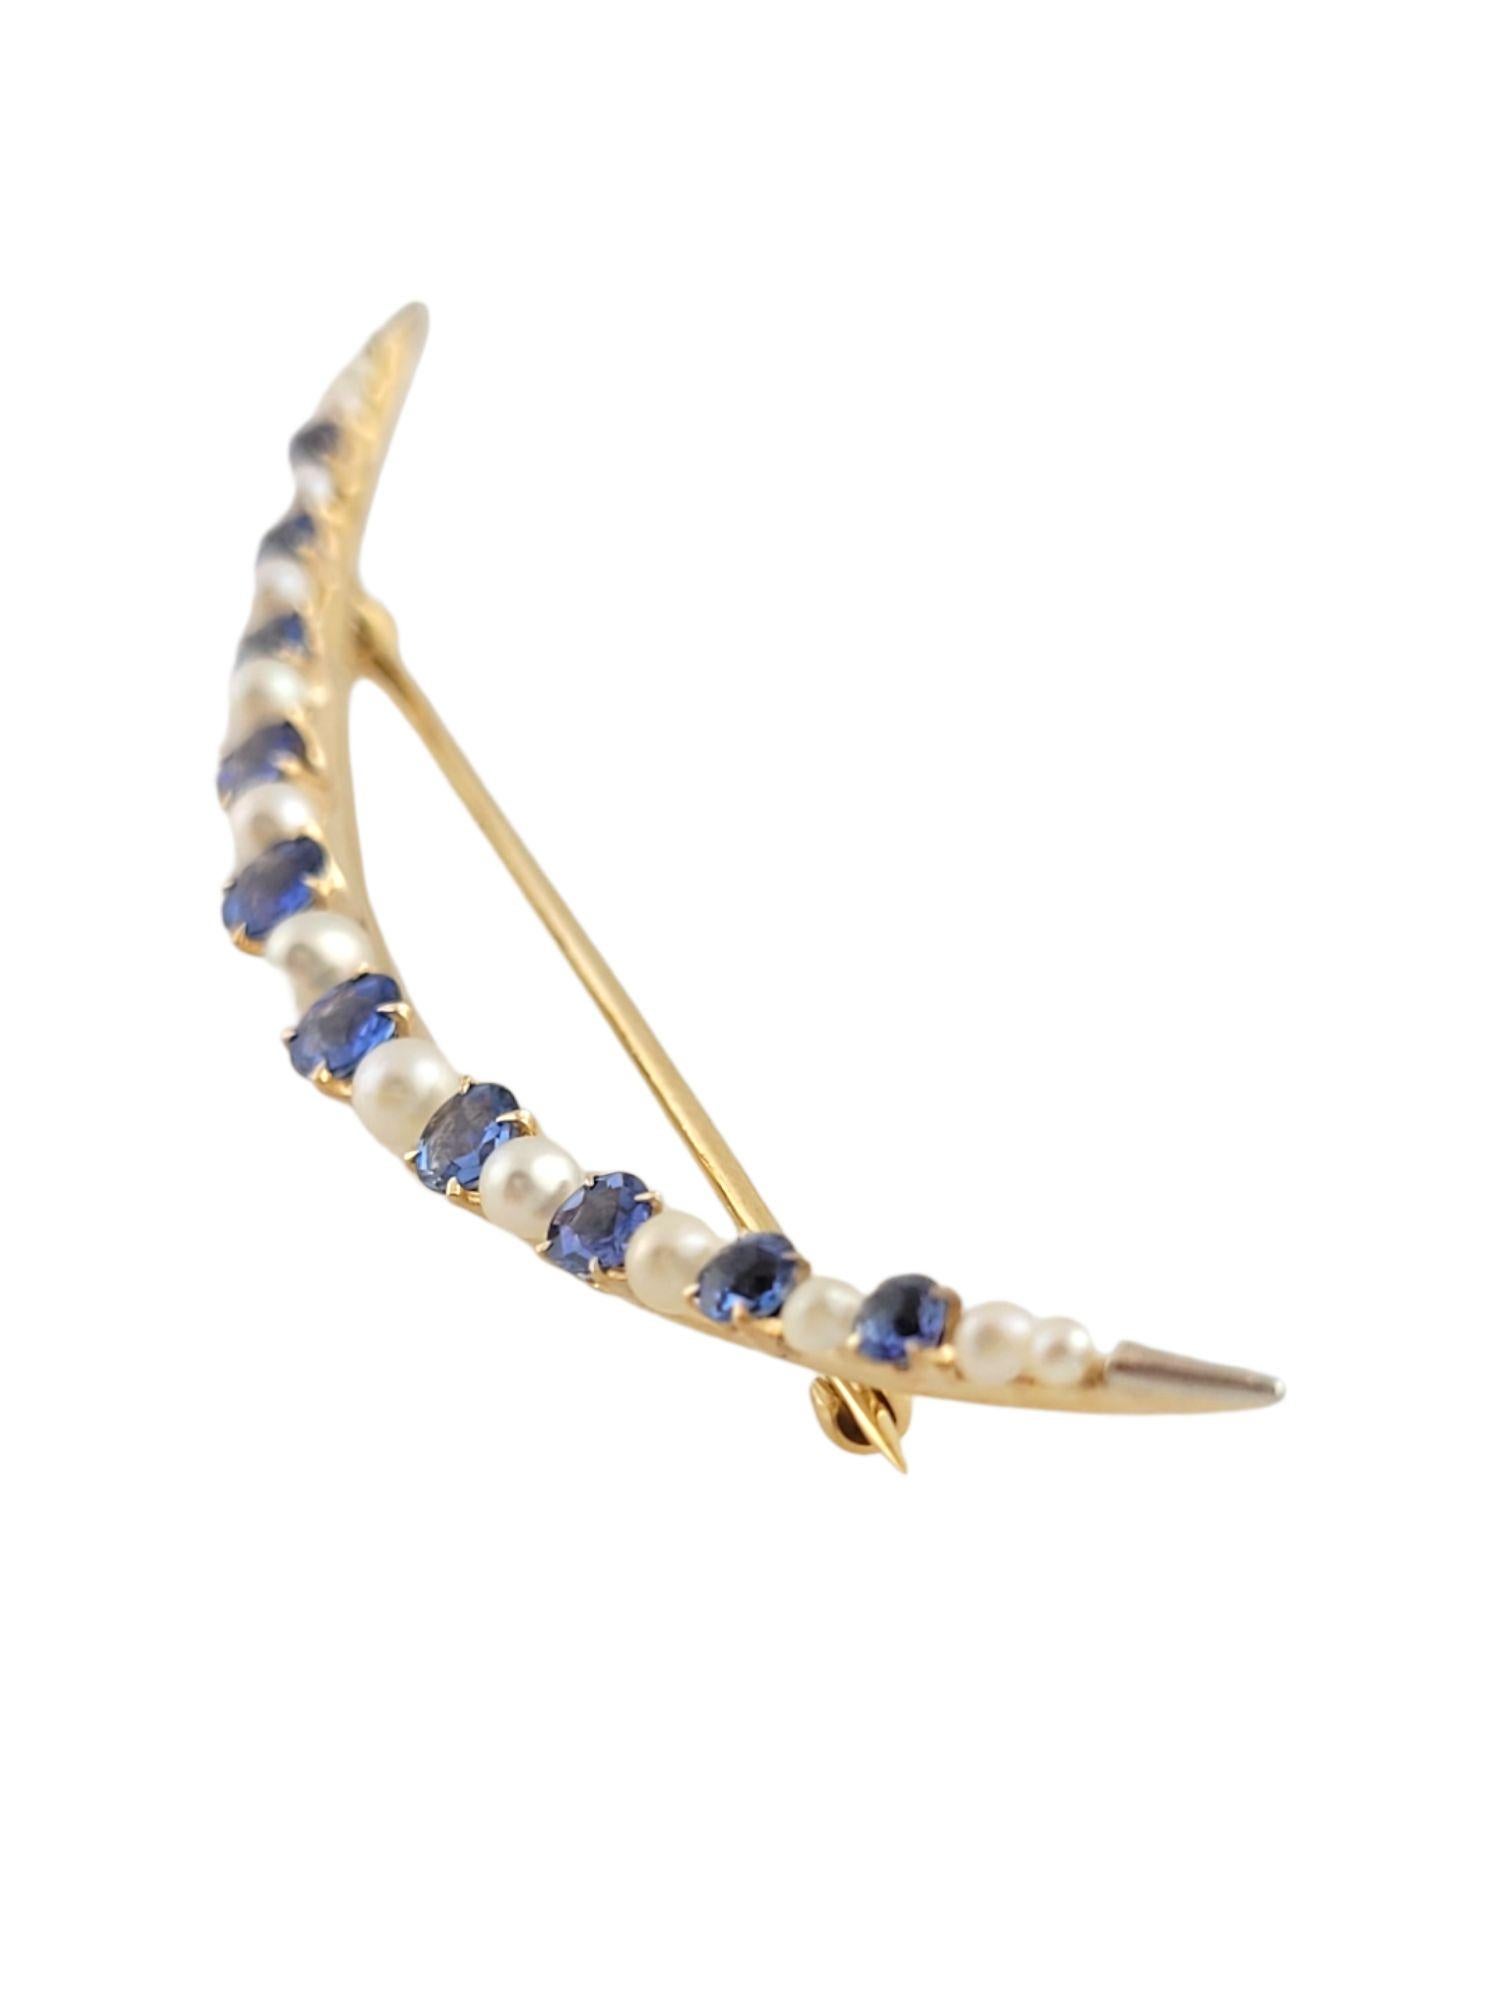 Gorgeous 14K gold crescent moon brooch with 10 blue sapphires and 13 pearls!

Pearls: 1.9-3.2mm

2.08cts in natural blue sapphires. Eye clean, medium light violet blue color, good cut

Size: 74.3mm X 15mm X 4.9mm

Weight: 5.9 g/ 3.7 dwt

Hallmark: